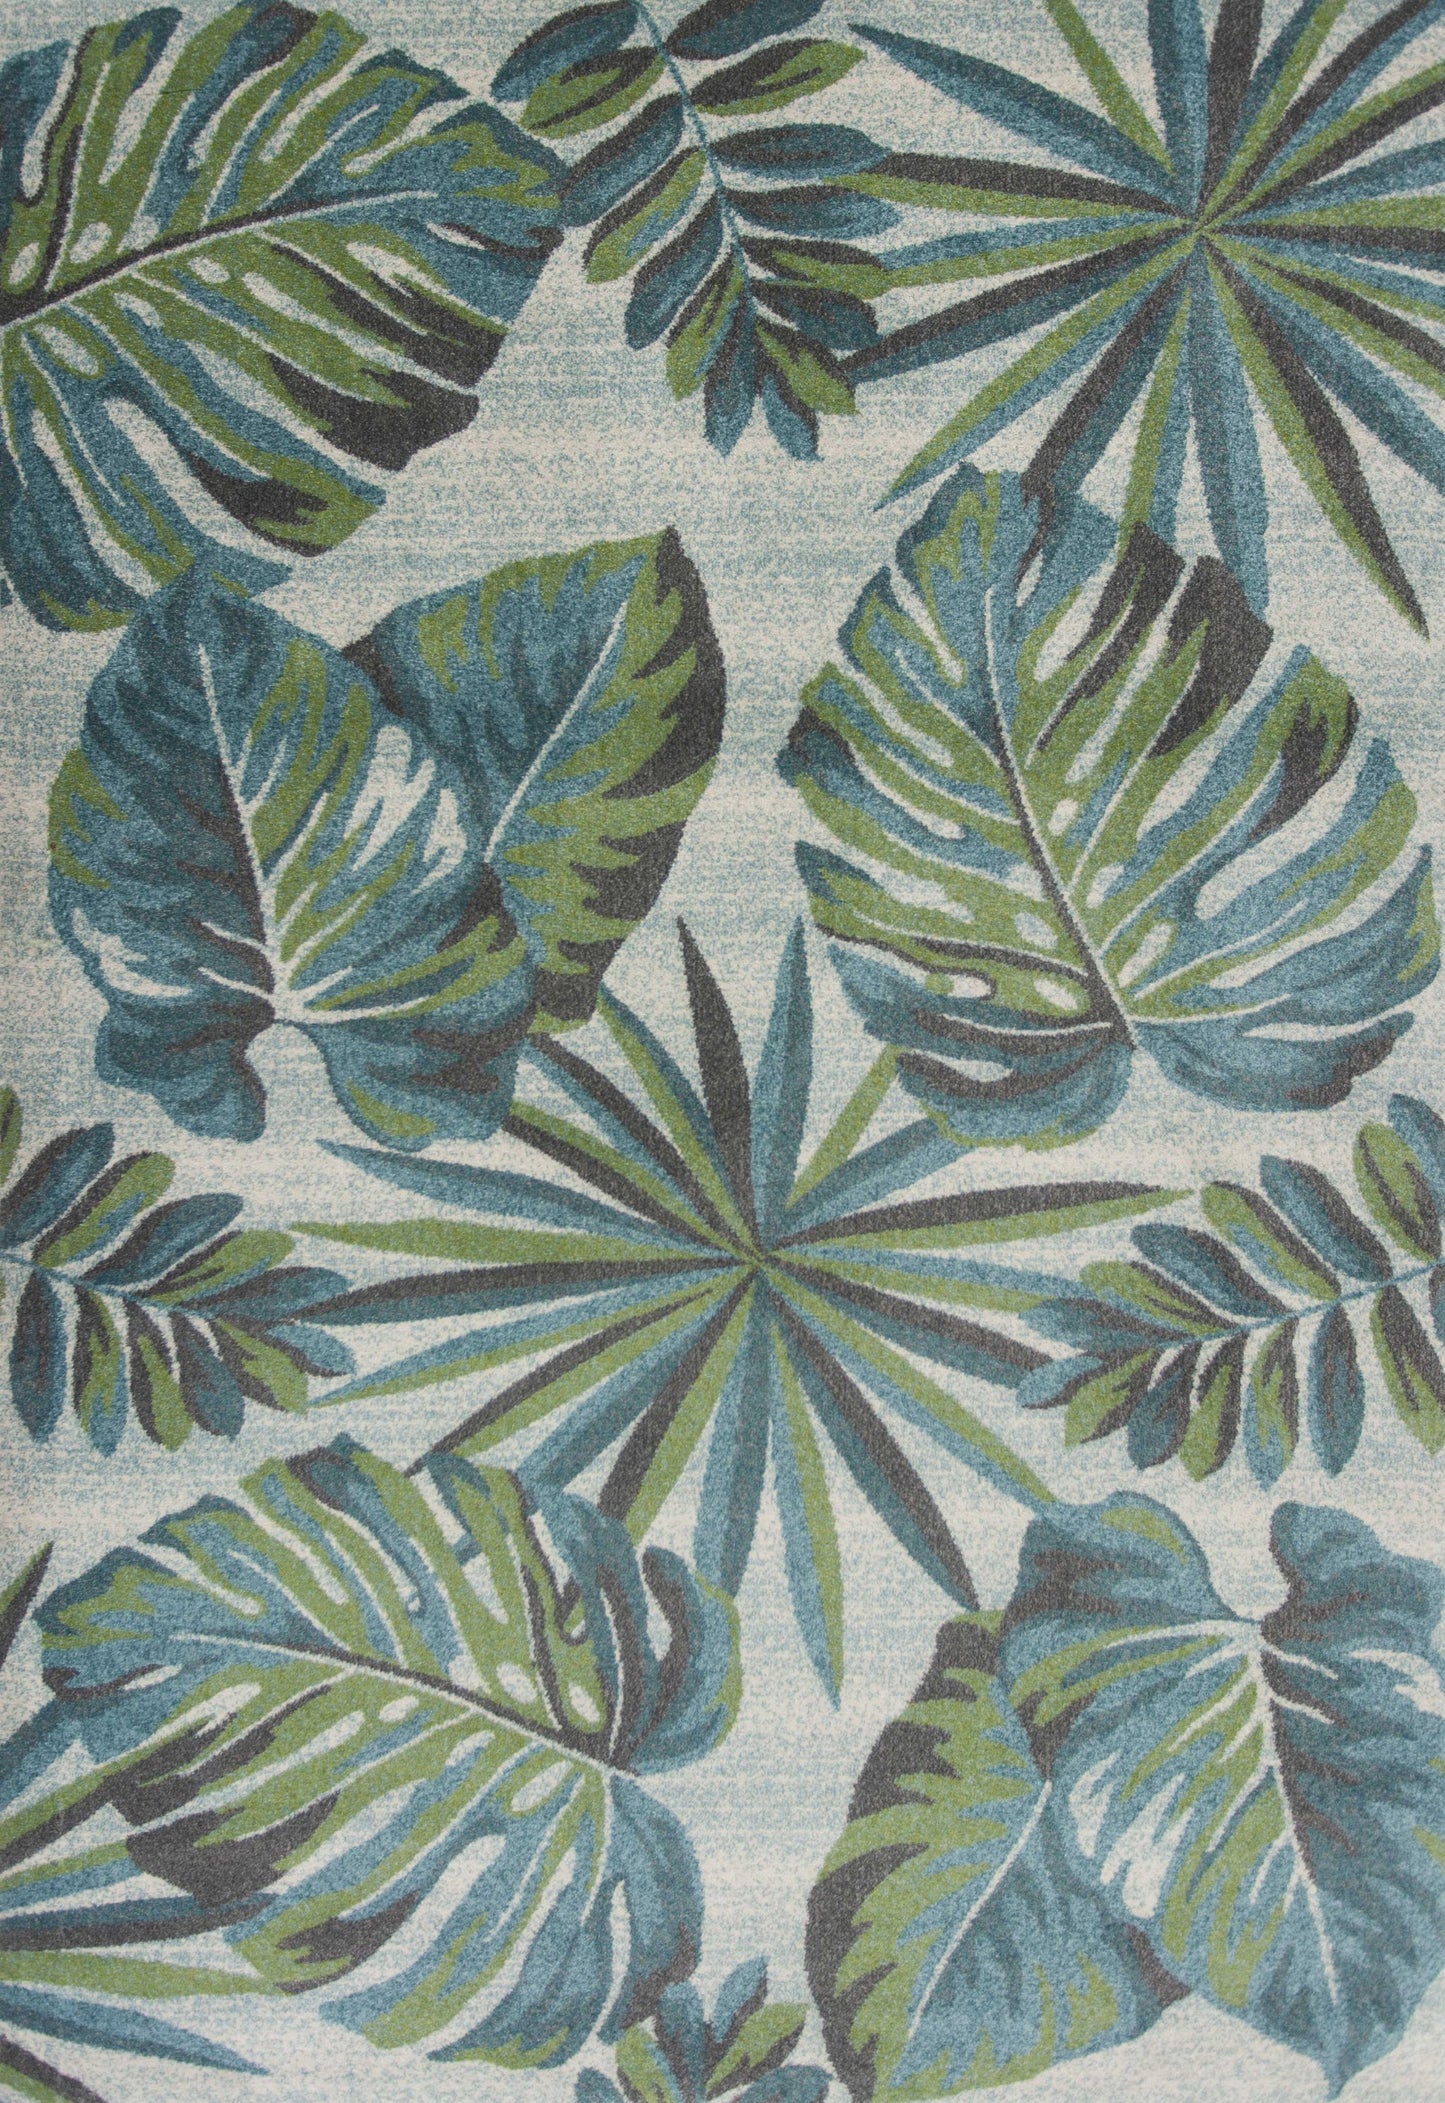 3' X 5' Teal and Ivory Tropical Floral Area Rug